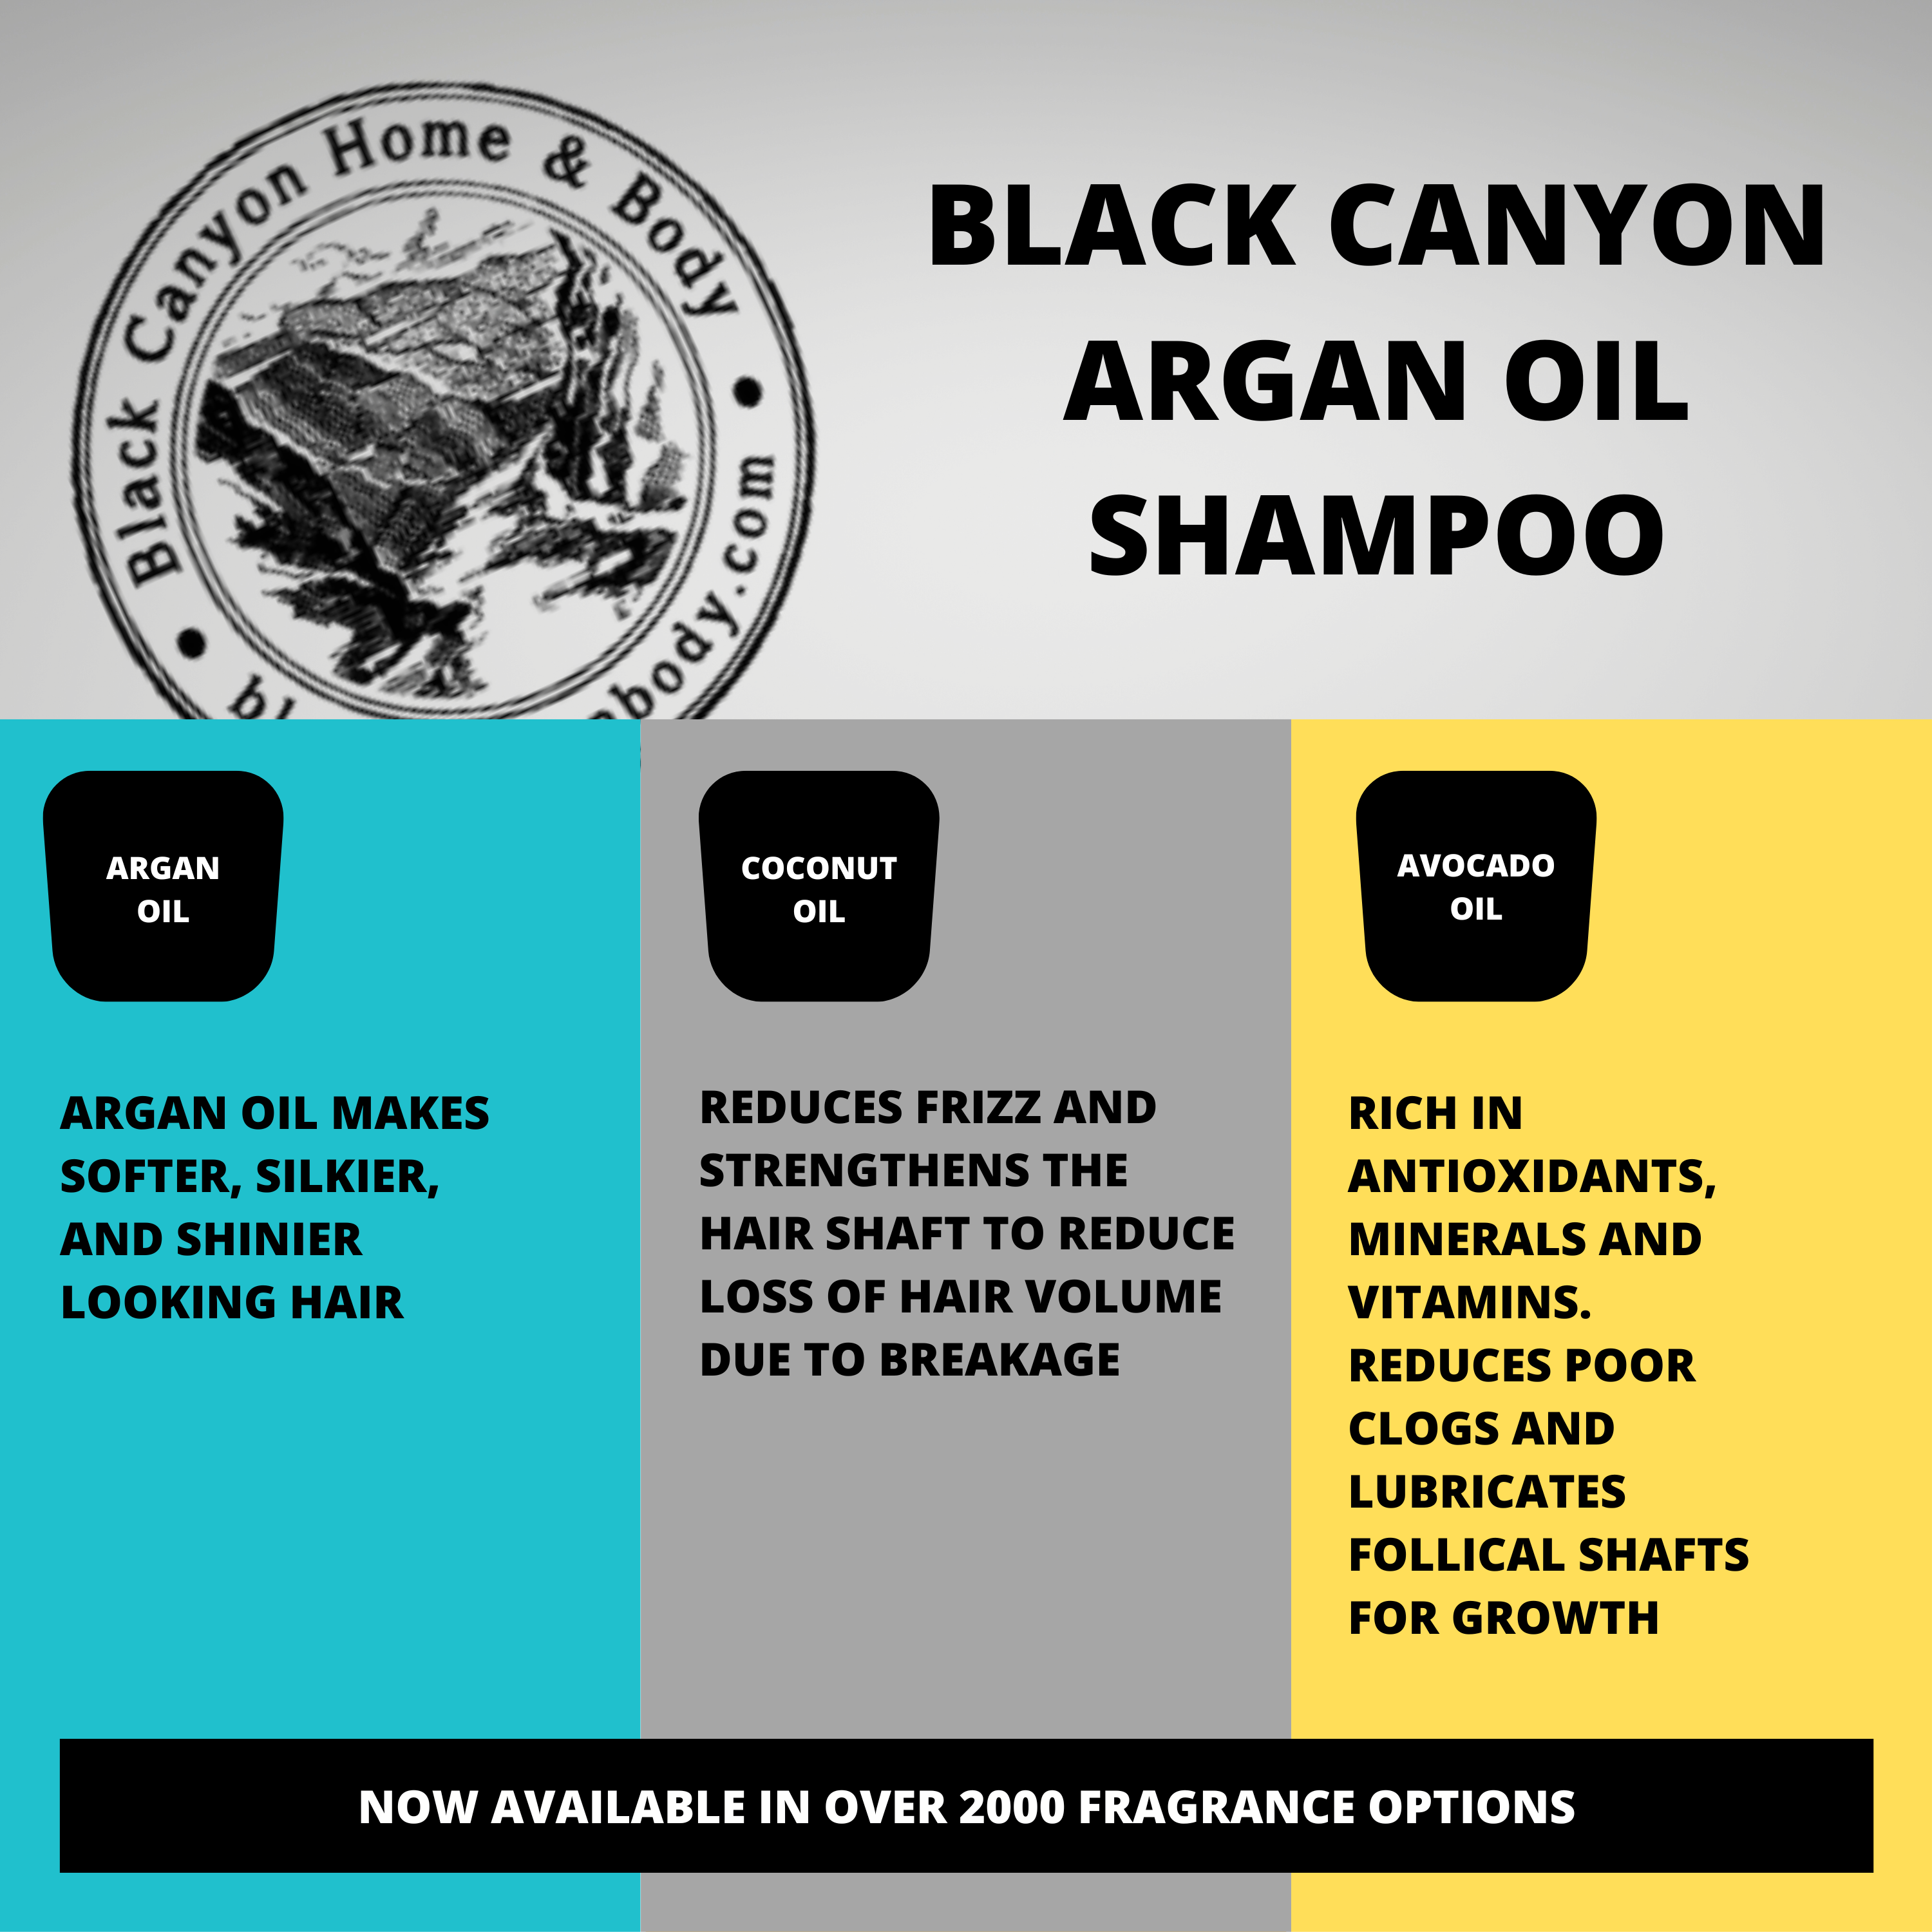 Black Canyon Blackberry Tangerine Scented Shampoo with Argan Oil